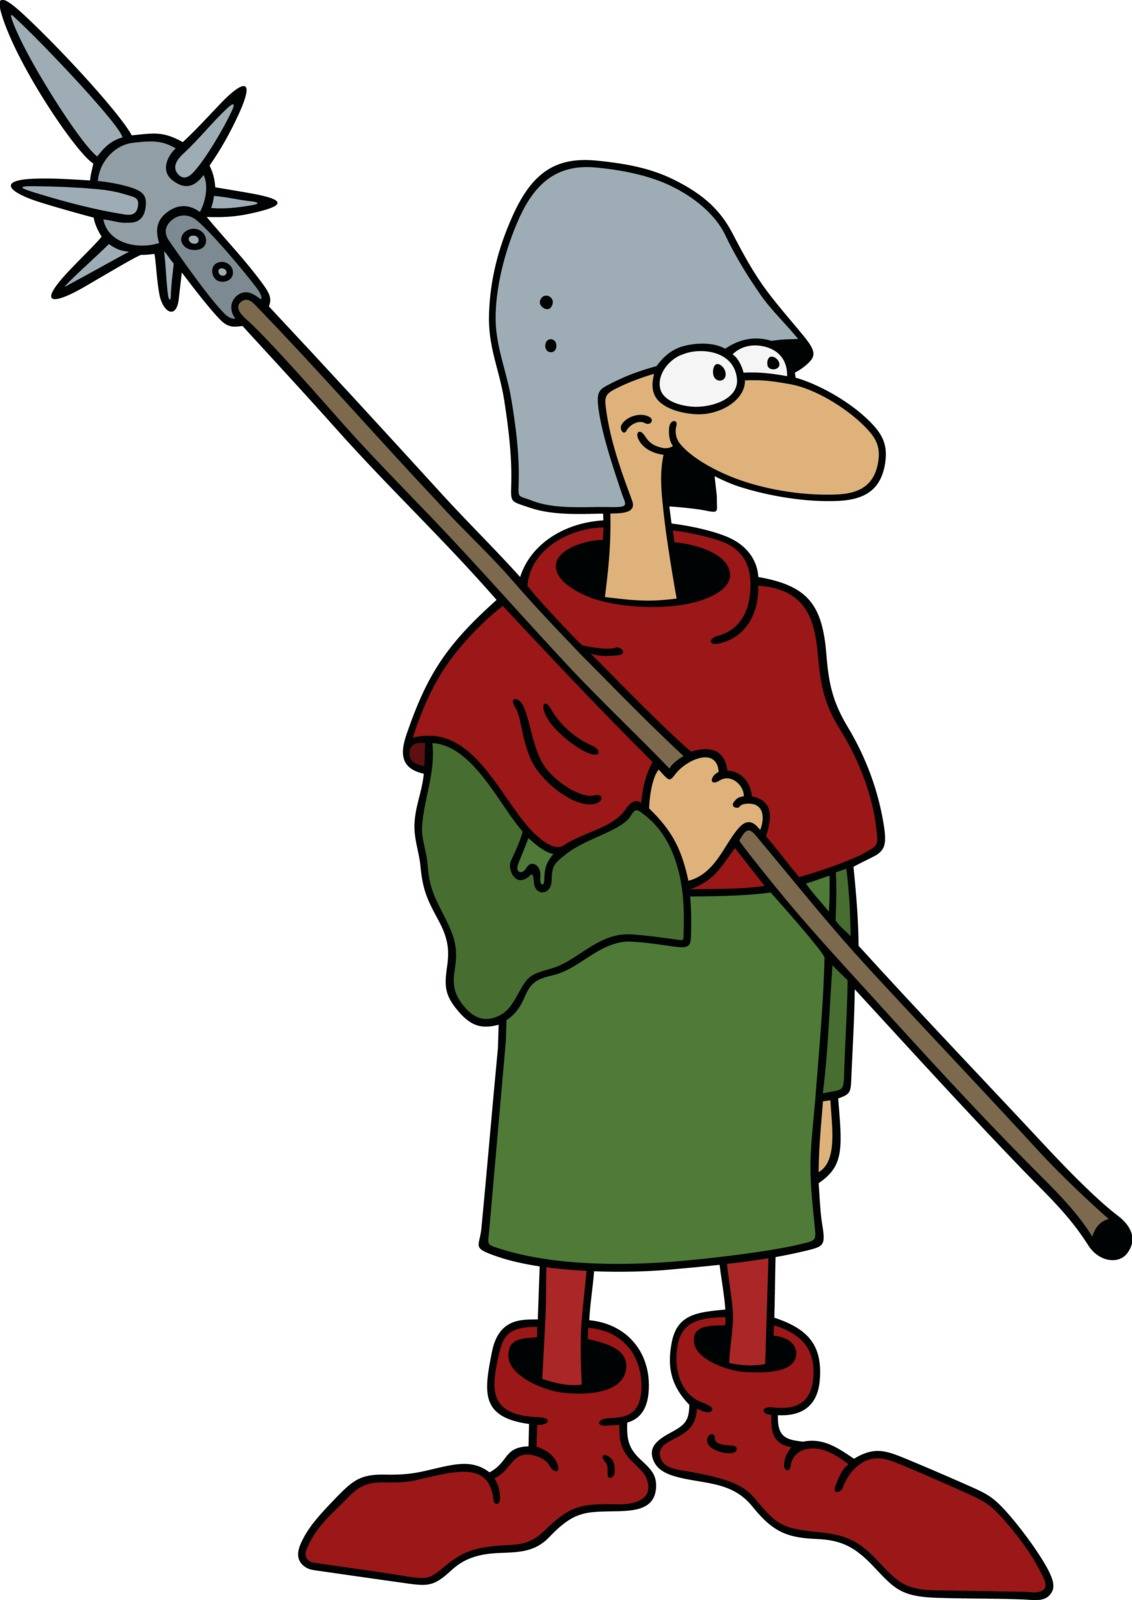 The vectorized hand drawing of a funny historical soldier with a lance